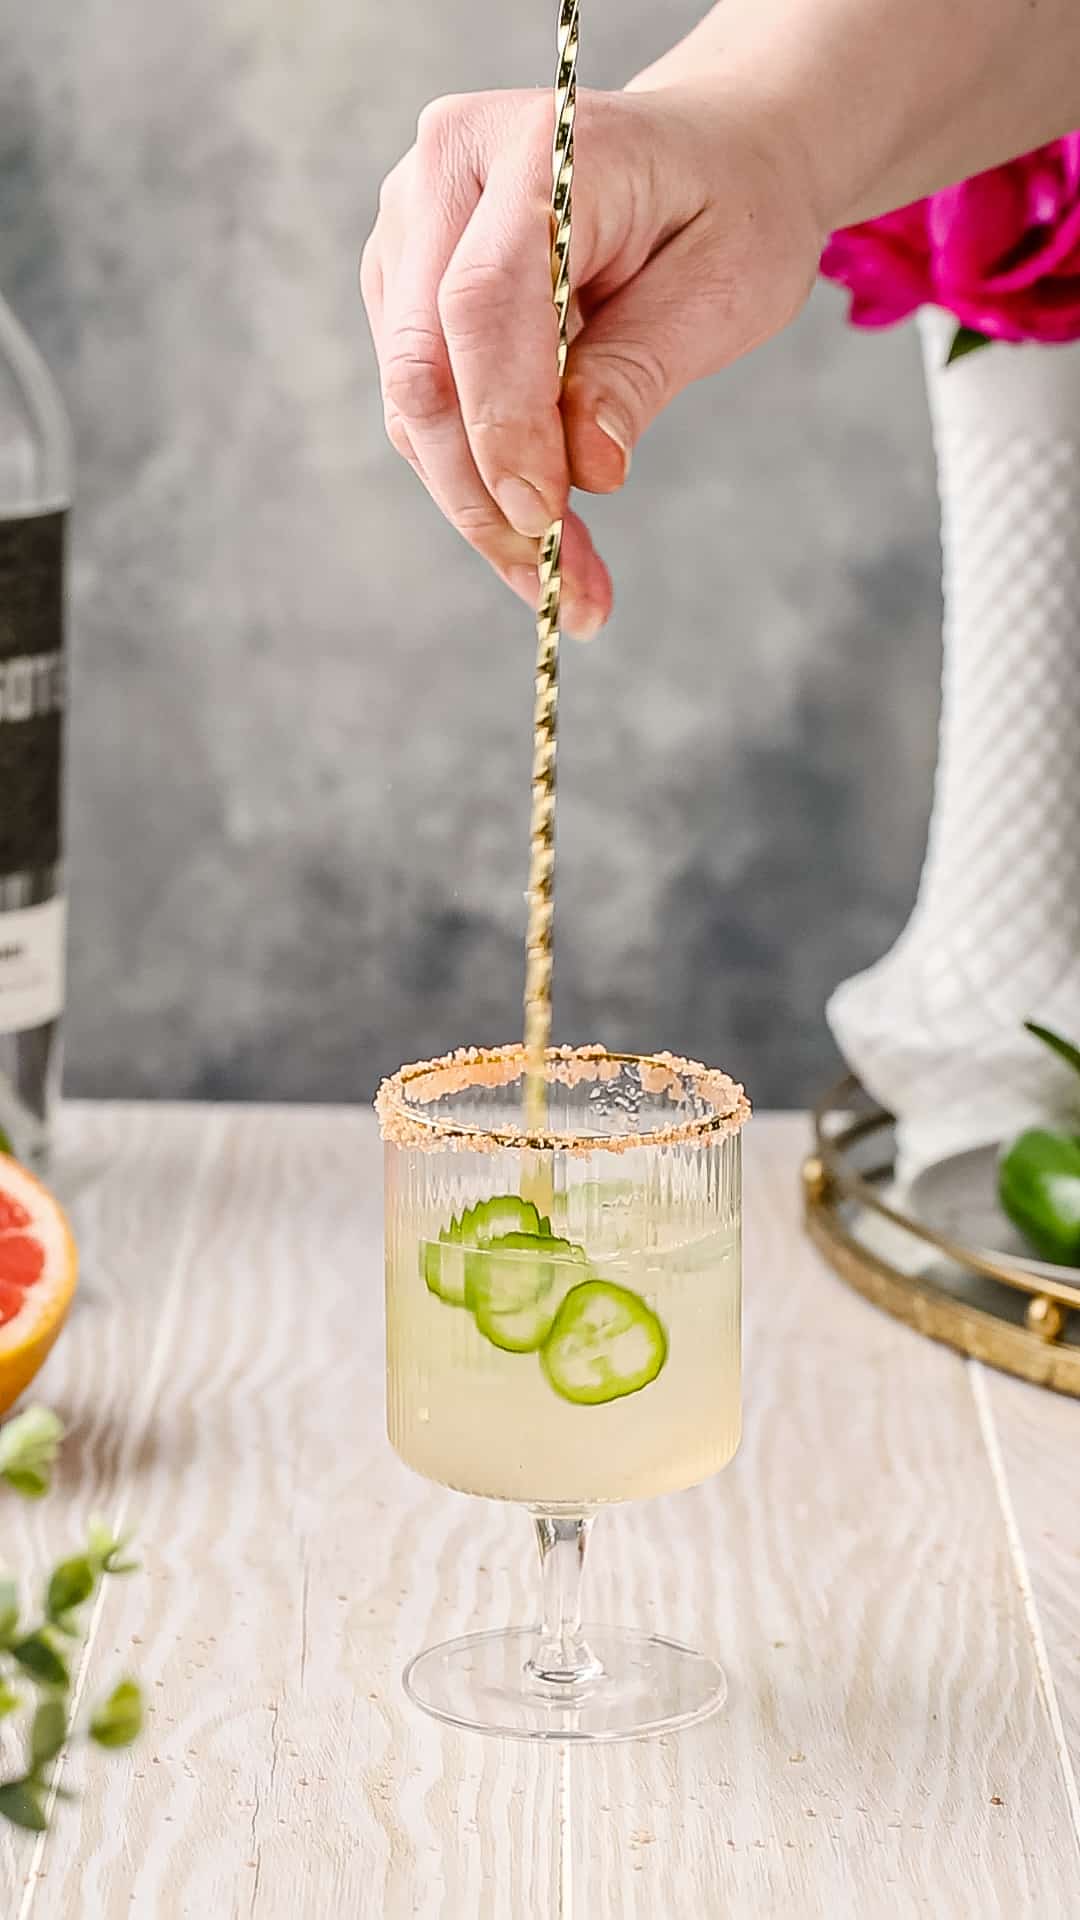 Stirring jalapeno slices into the cocktail glass.